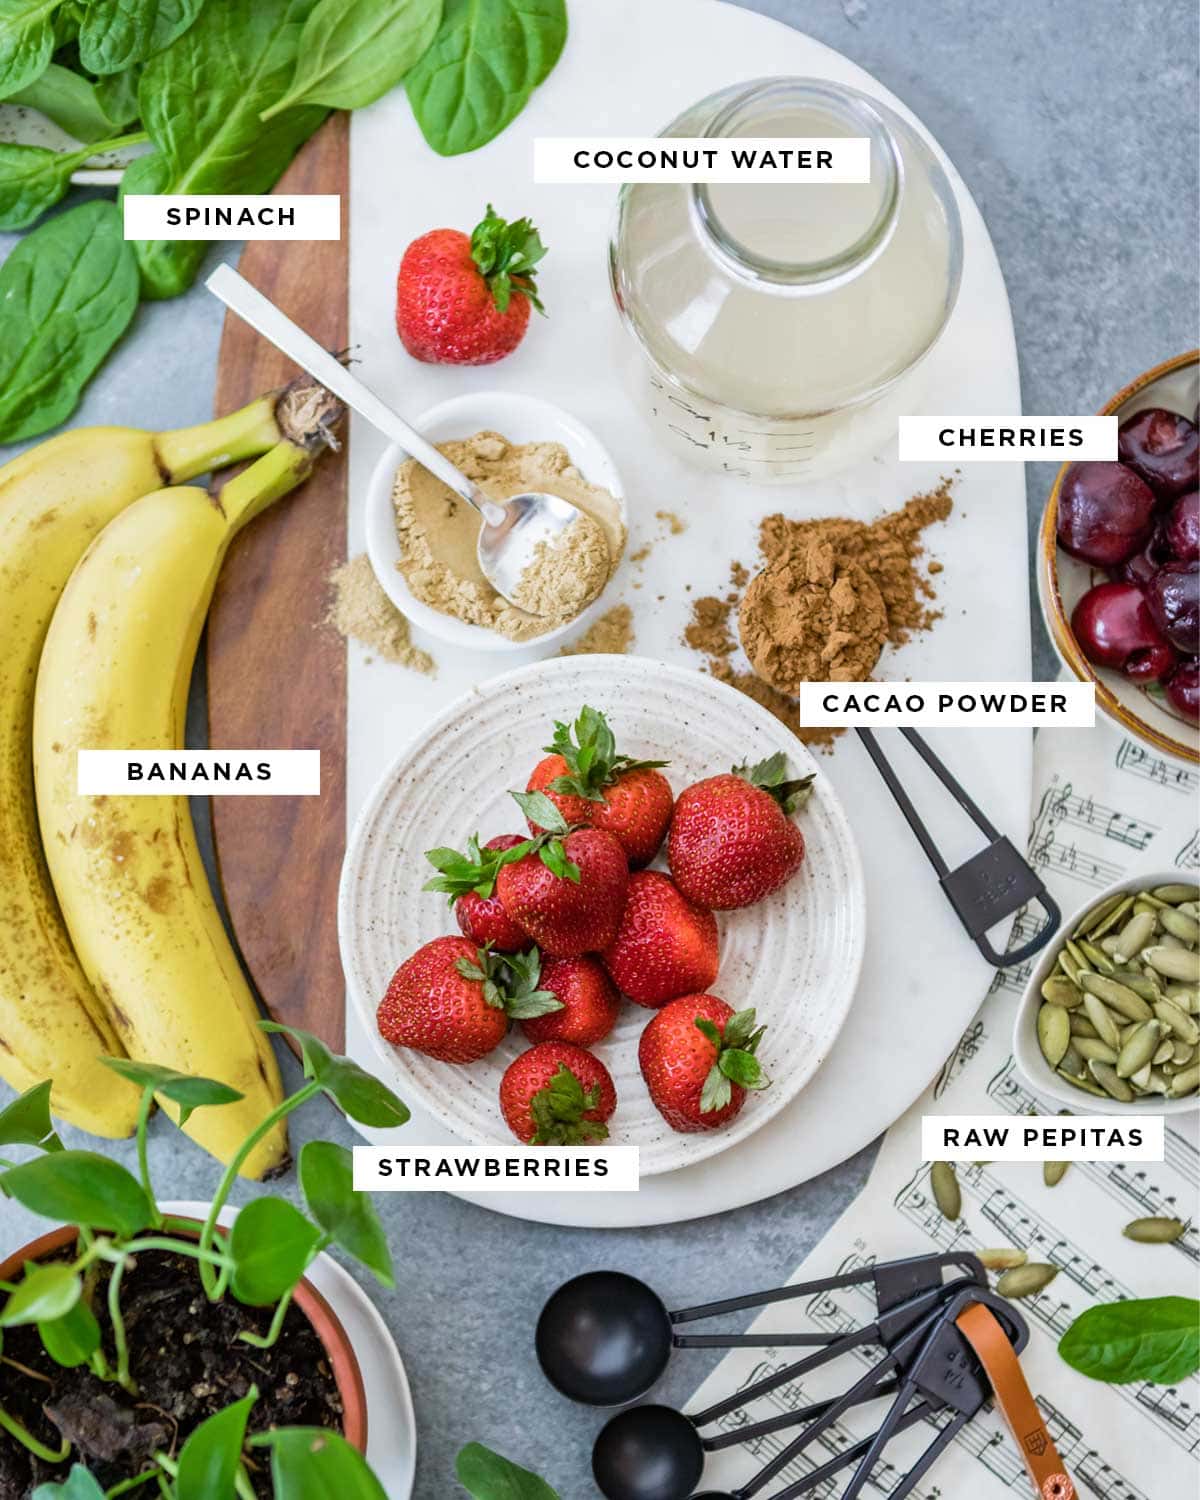 list of iron rich foods in this iron-rich smoothie bowl including coconut water, cherries, cacao powder, bananas, strawberries and pepitas.